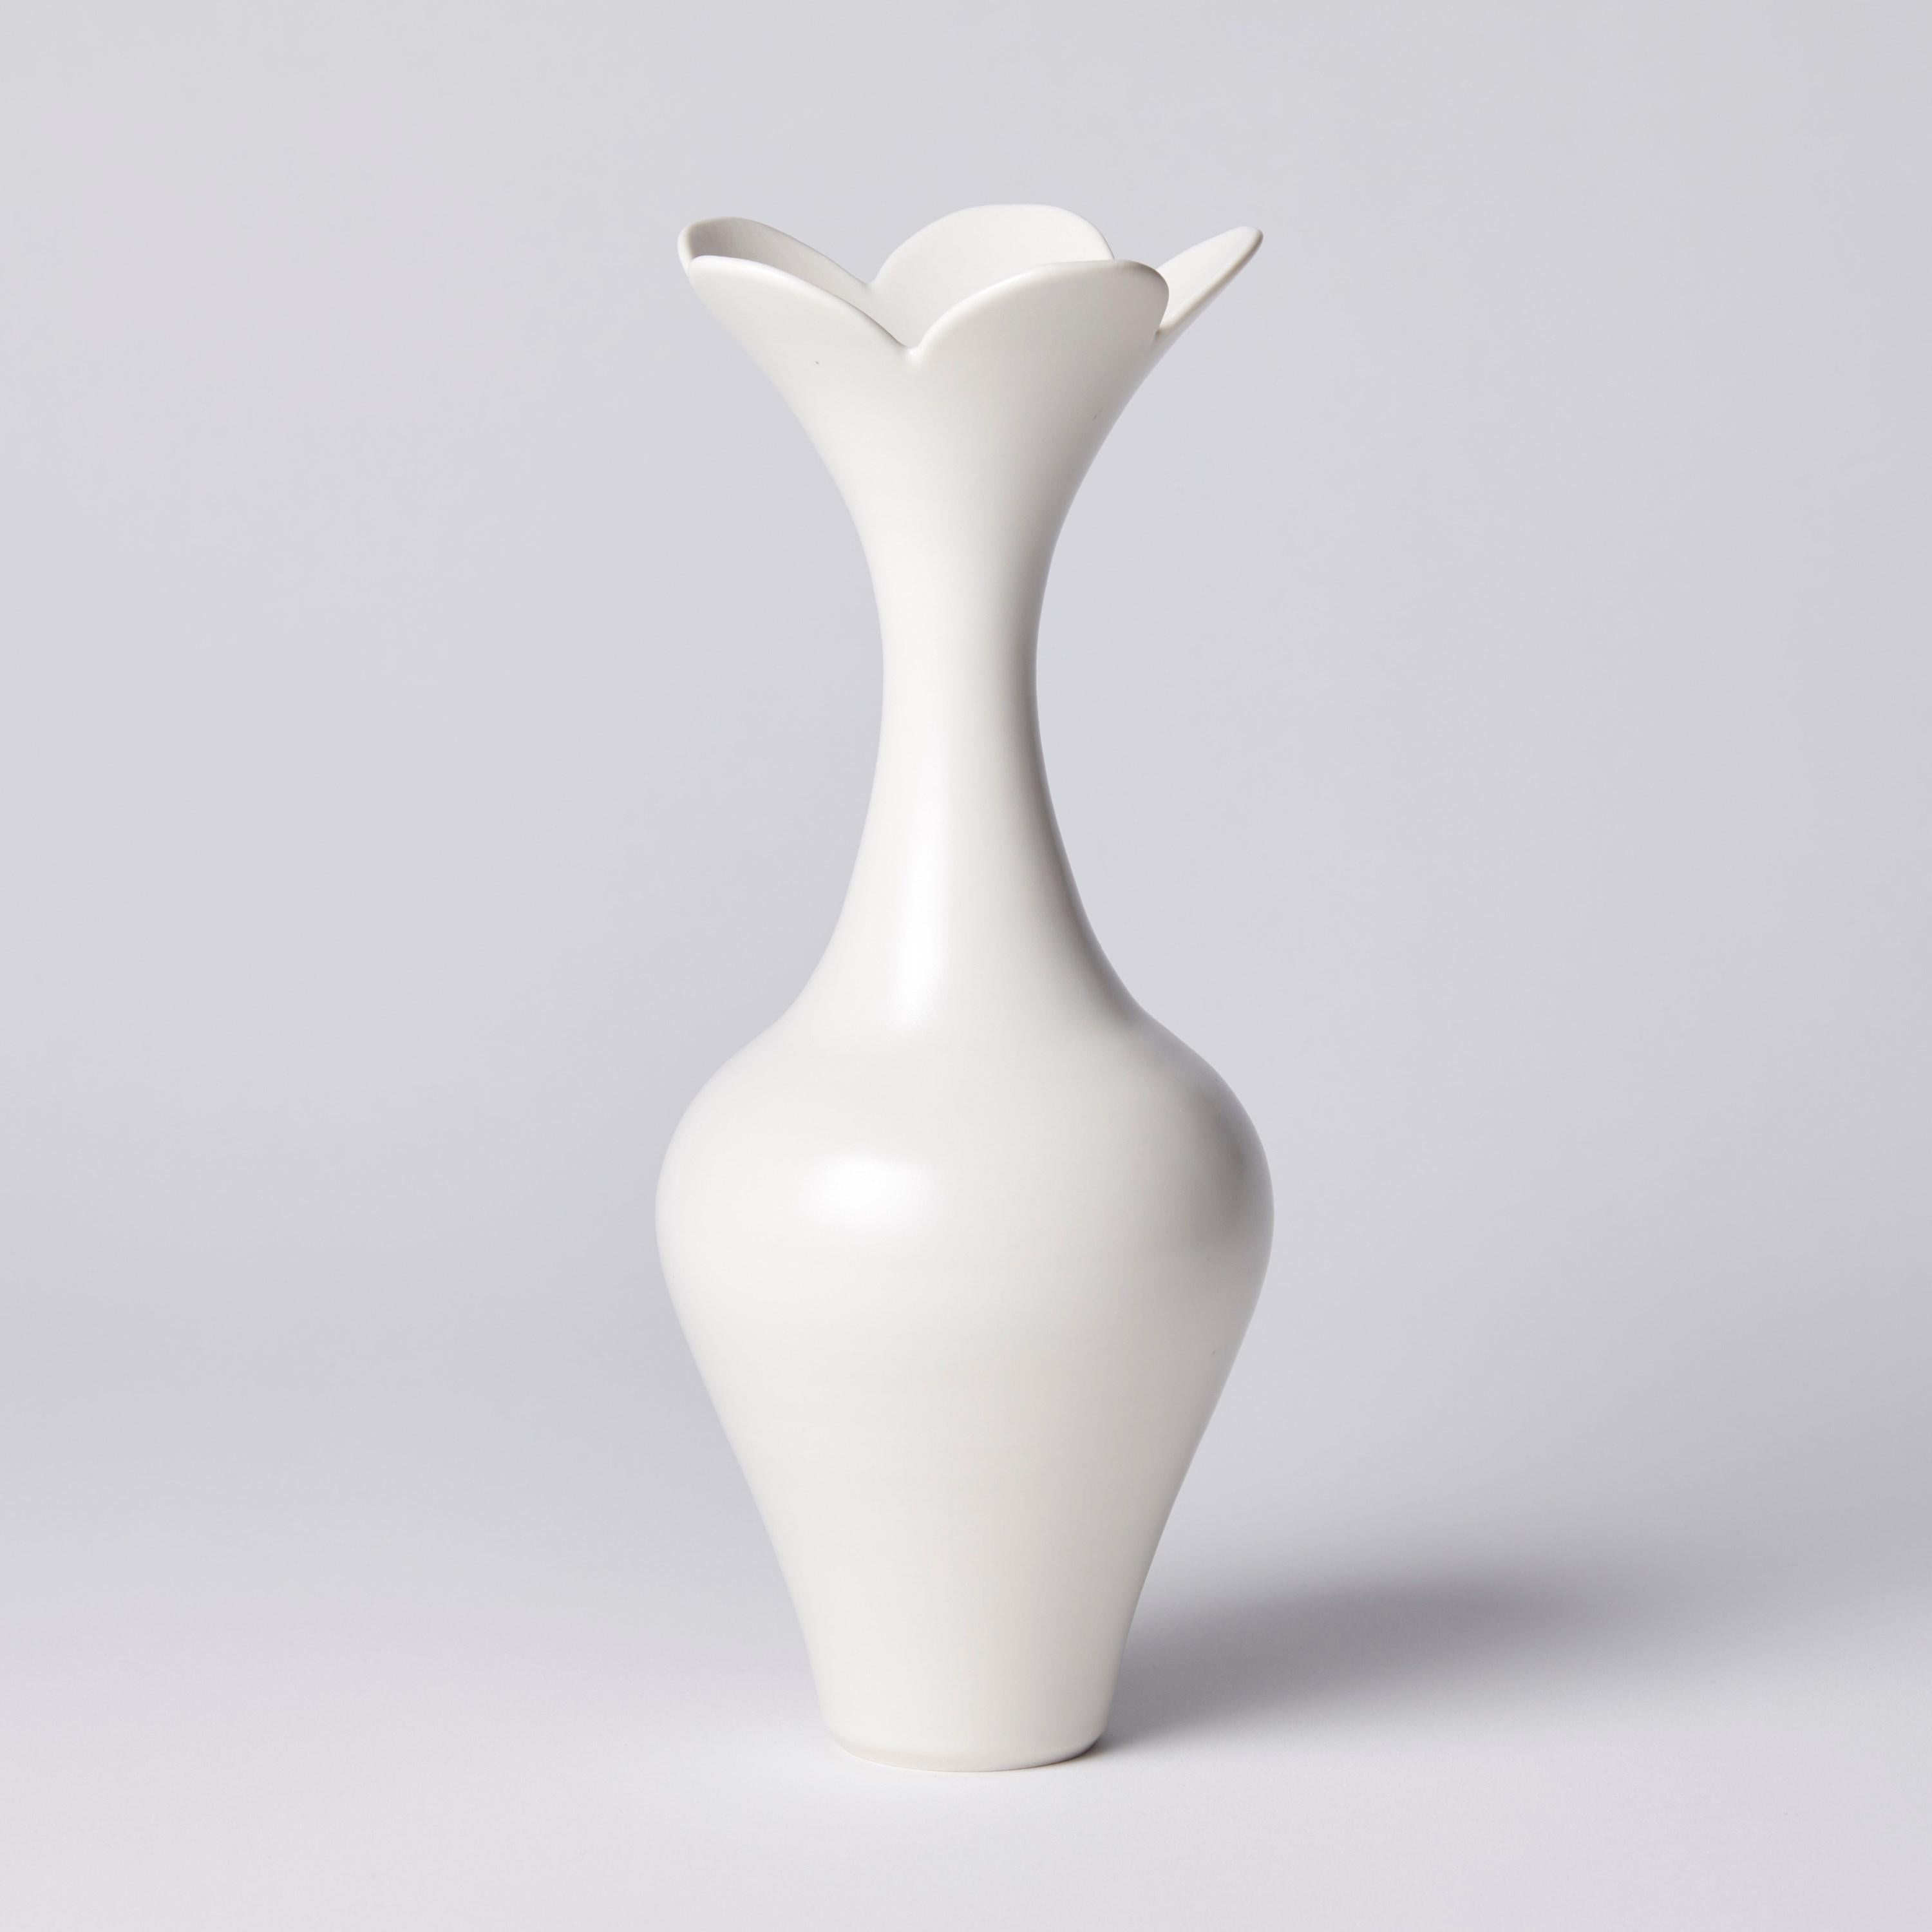 ‘Vase with Petal Rim' is a unique porcelain sculptural vessel by the British artist, Vivienne Foley. 

Vivienne Foley is based in Gloucestershire where she produces exquisite ceramic sculpture. Although in essence they are often functional pieces